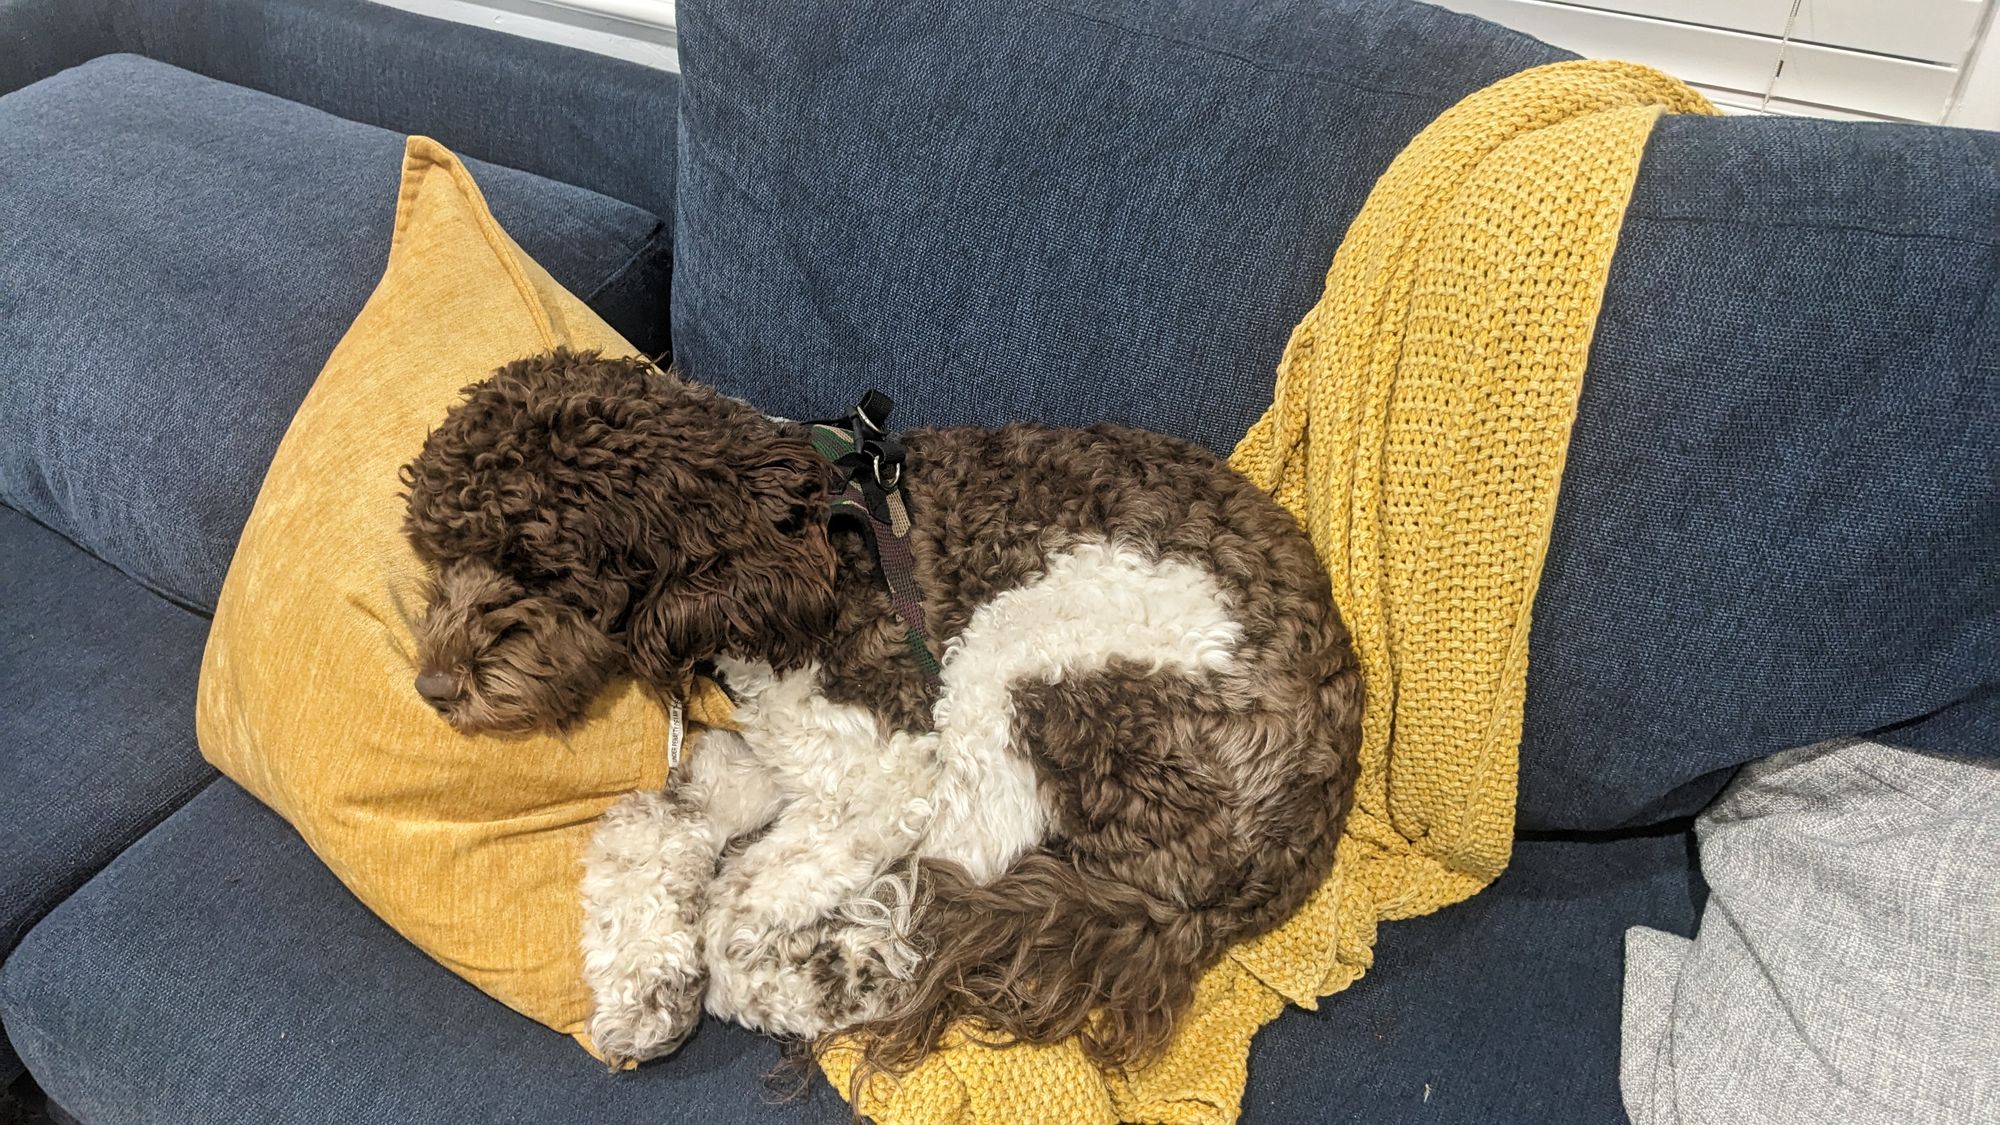 A brown and white labradoodle curled up asleep on a yellow blanket, on a blue couch.